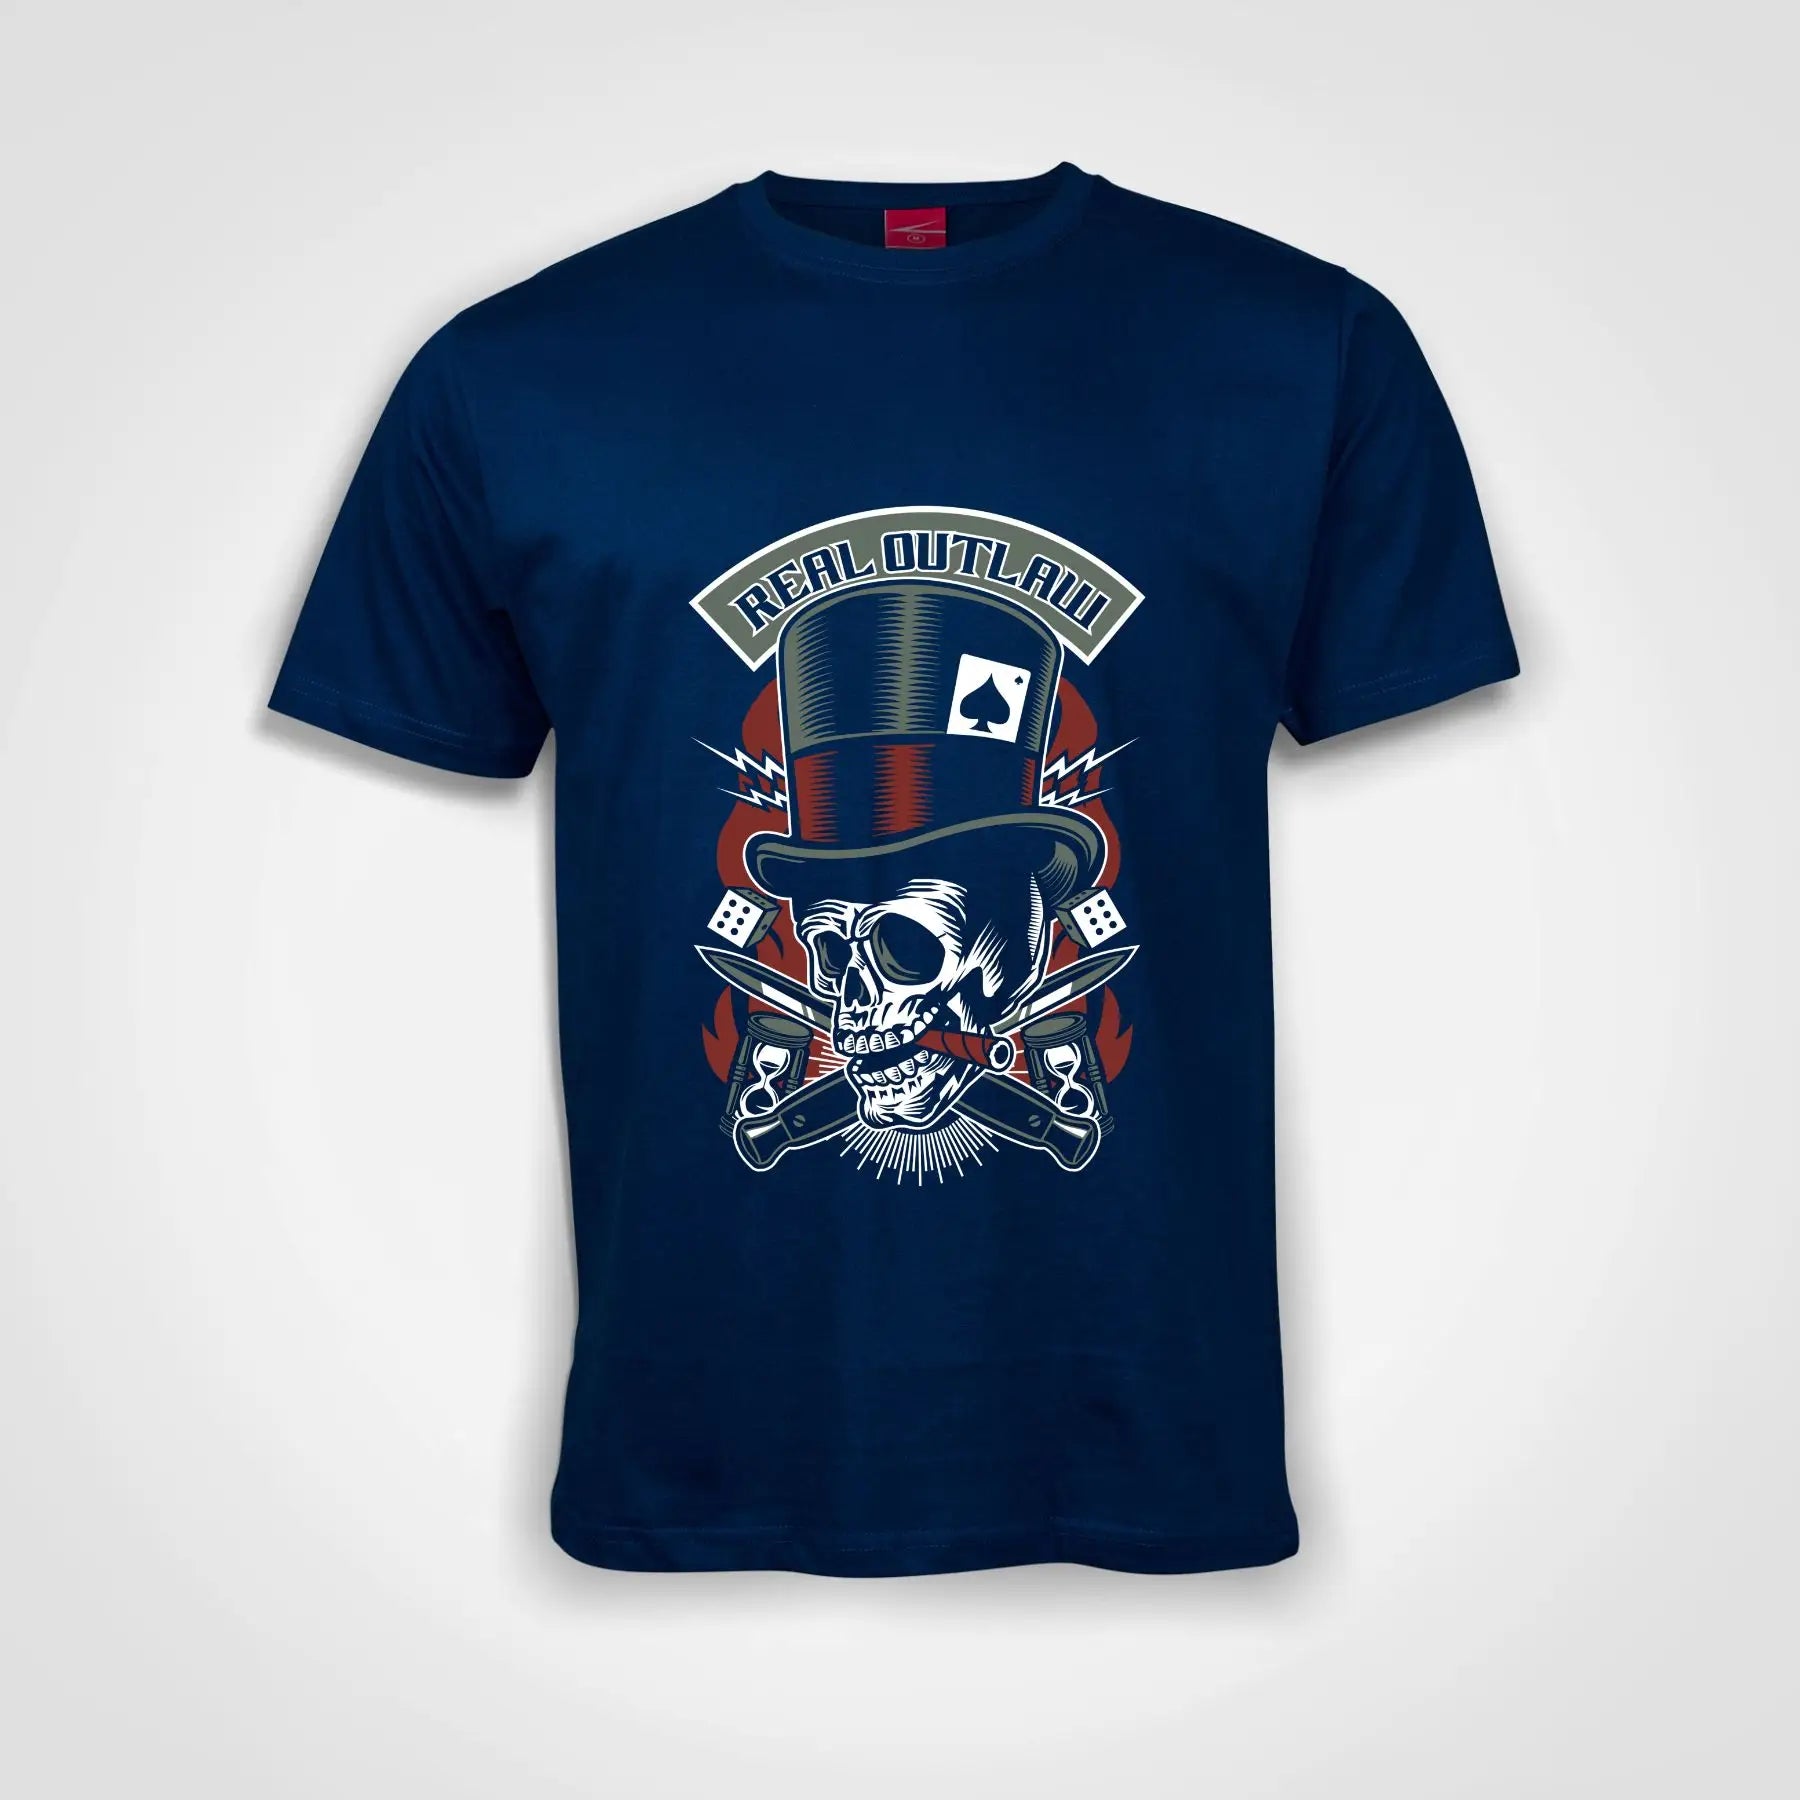 Real Outlaw Skull Cotton T-Shirt Royal Blue IZZIT APPAREL